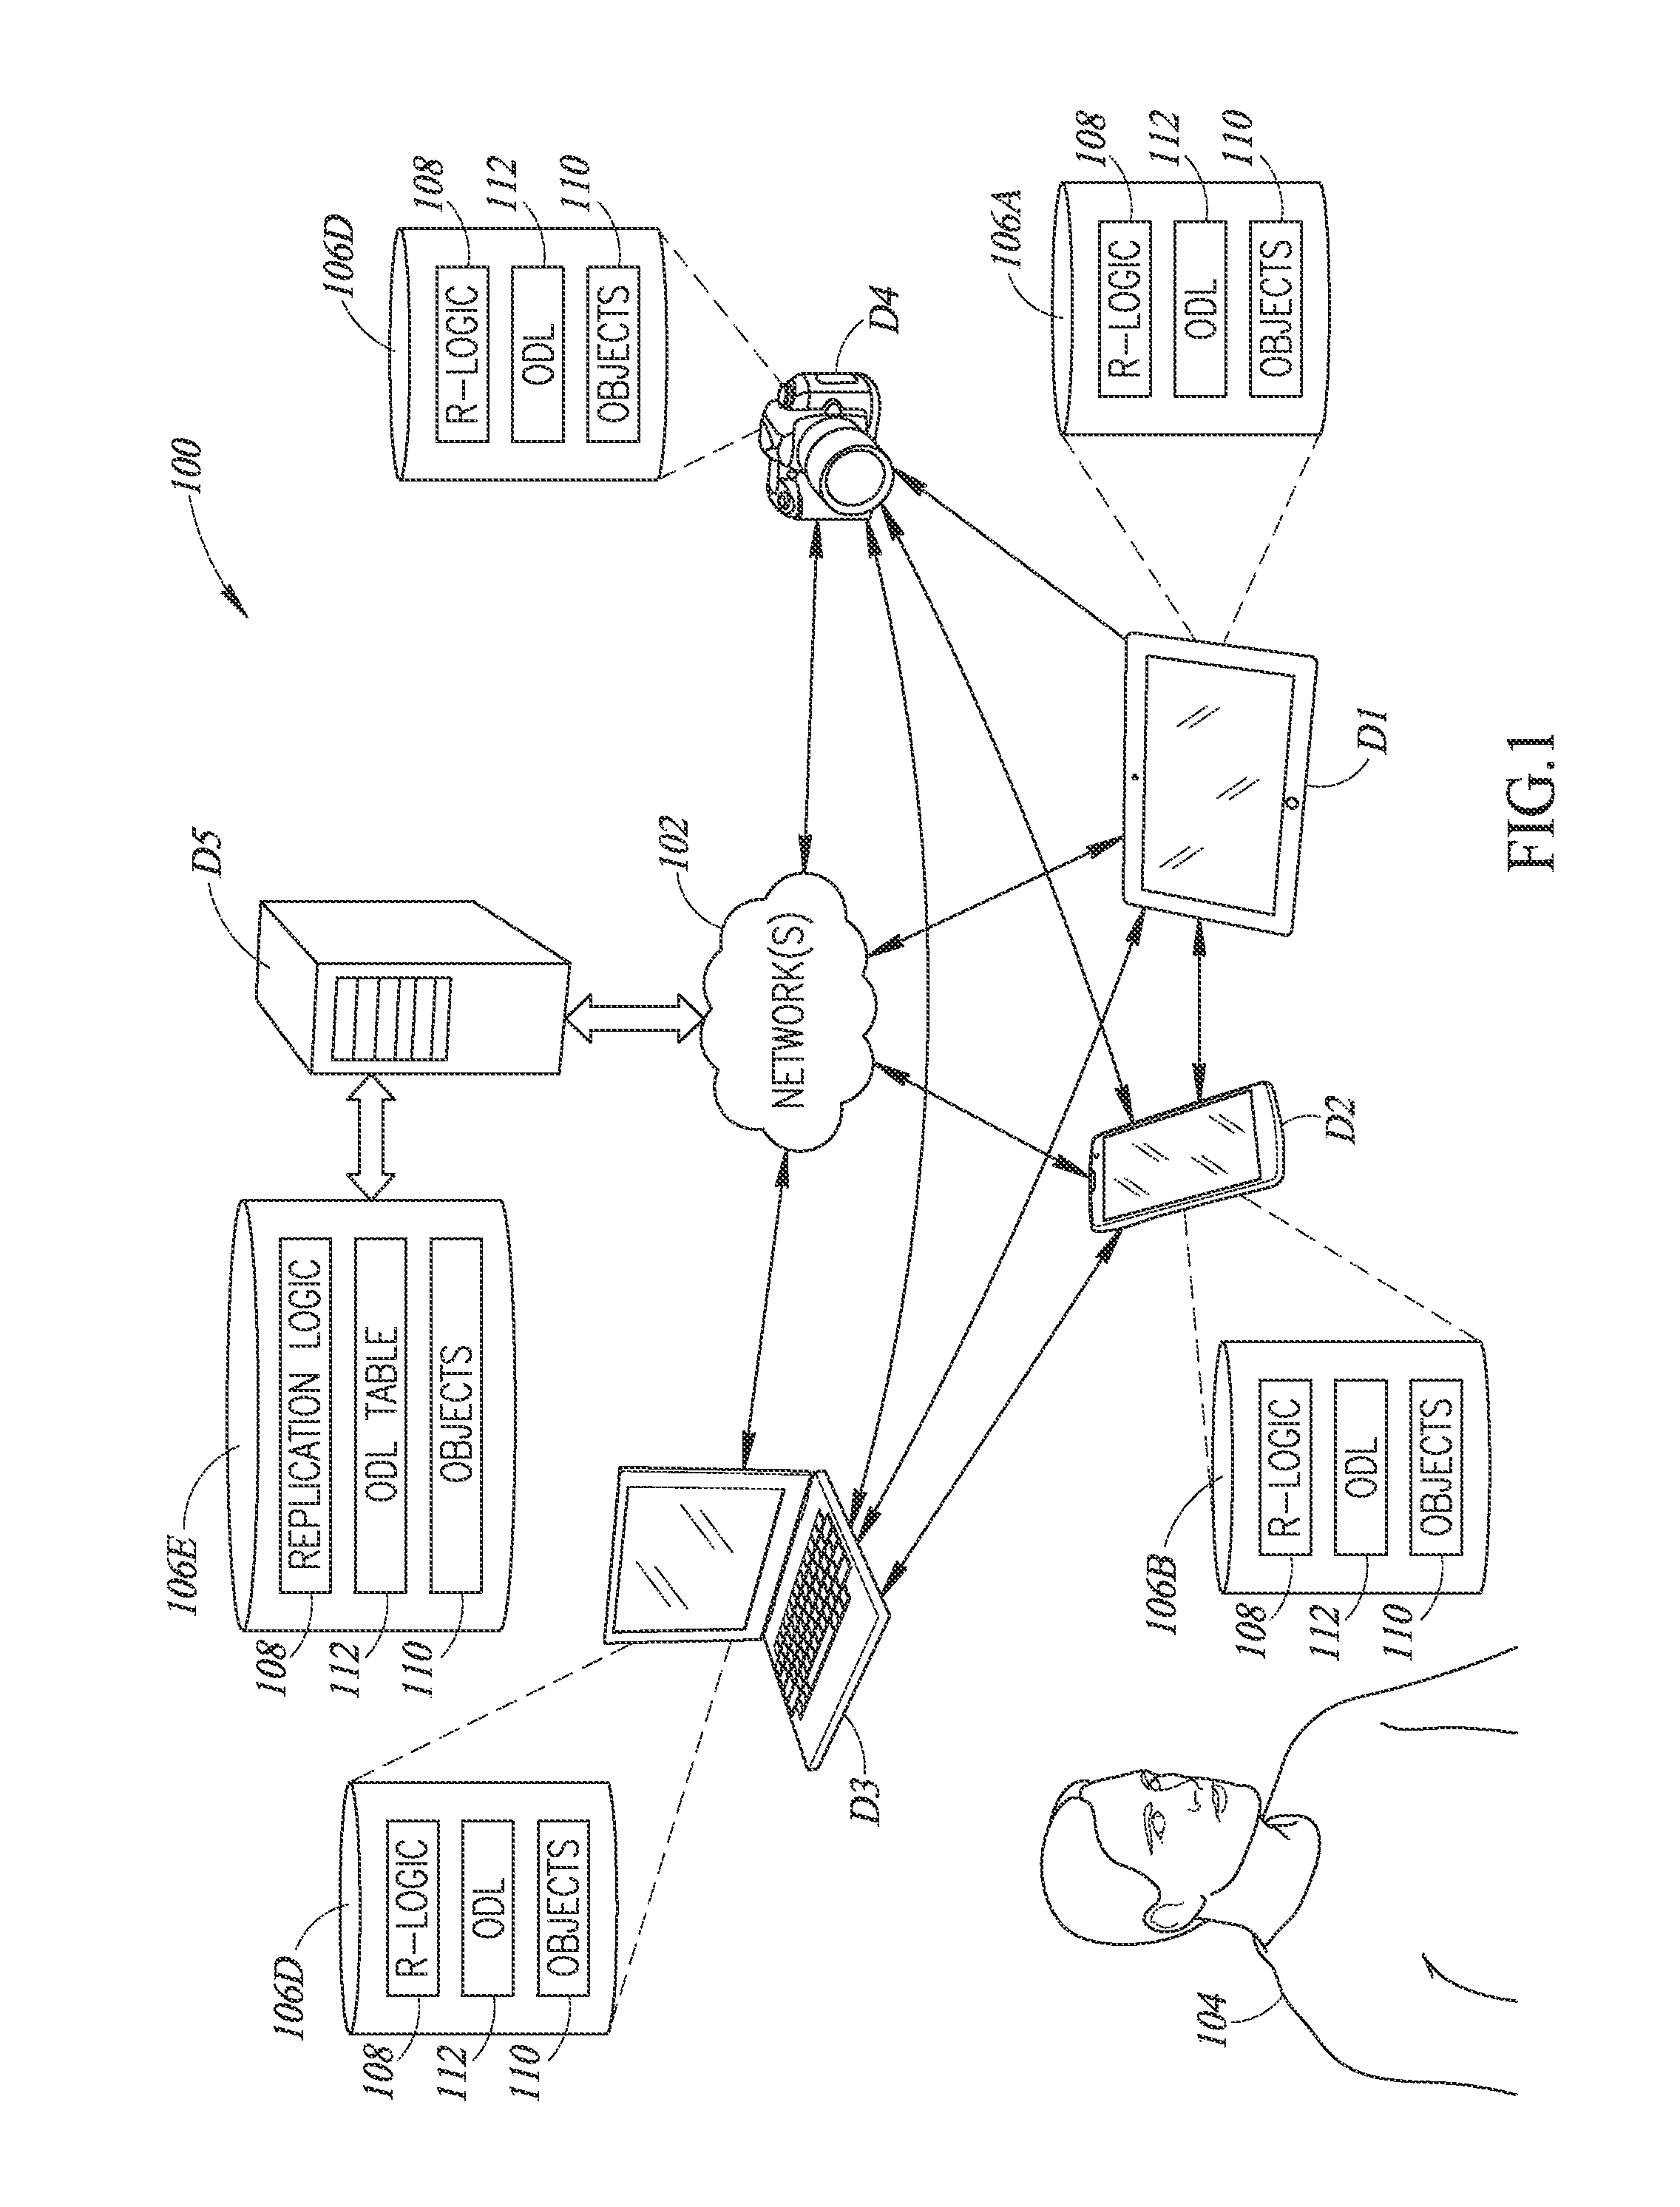 Object replication using object device links and flags